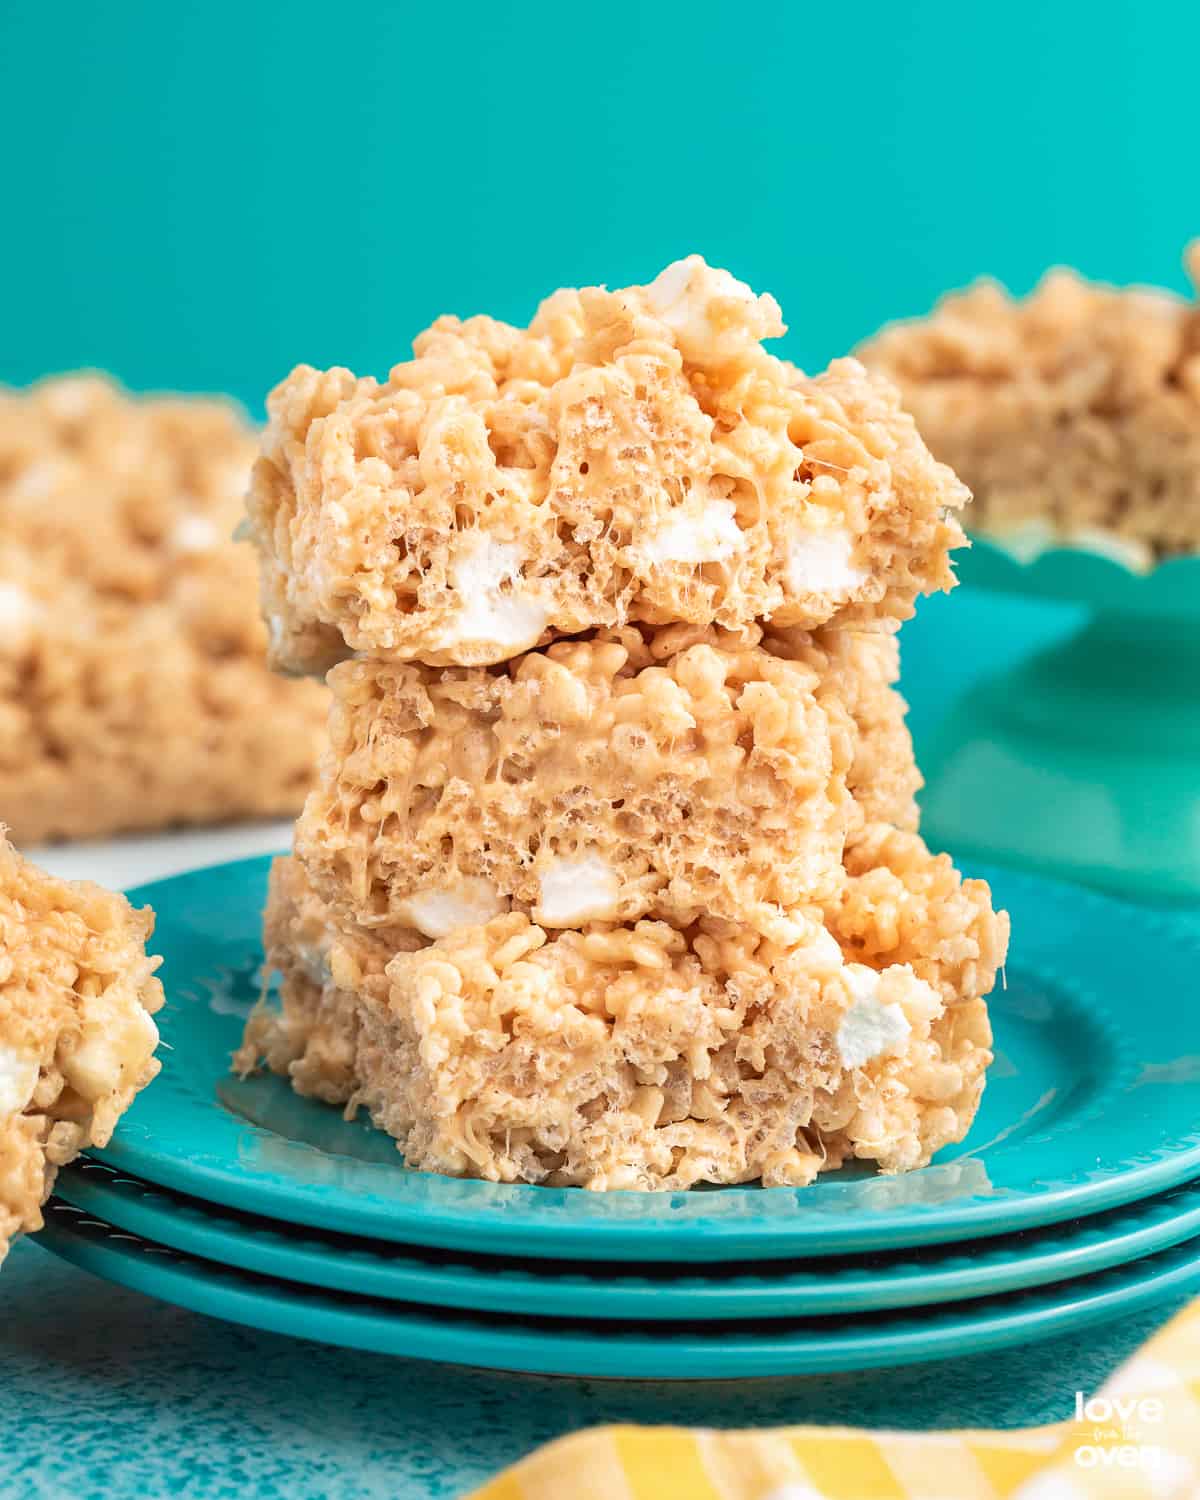 A stack of peanut butter rice krispies treats on blue plates.